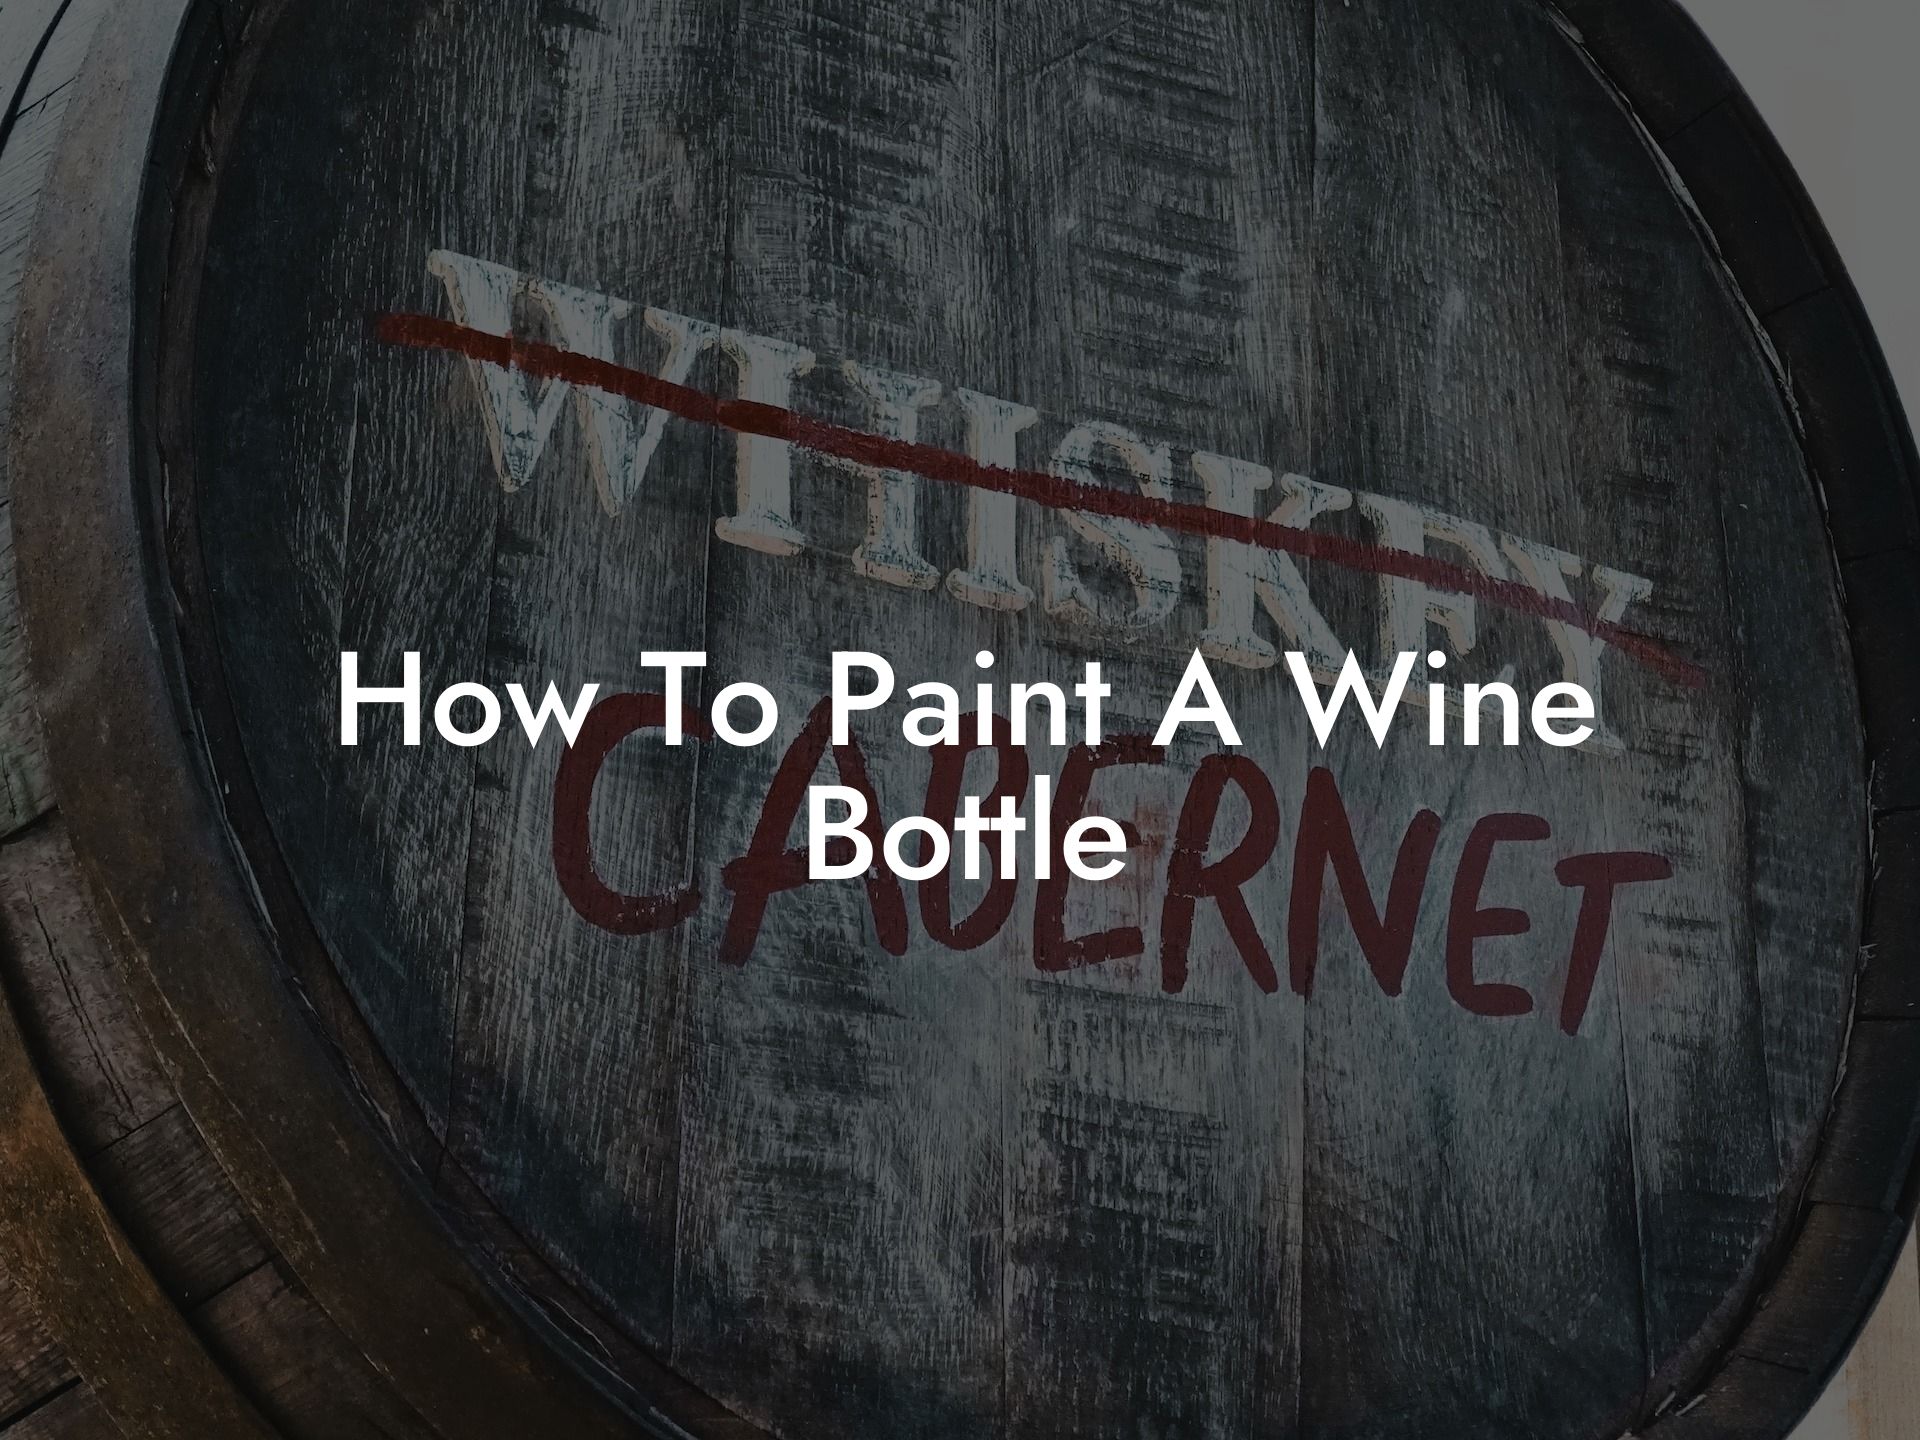 How To Paint A Wine Bottle